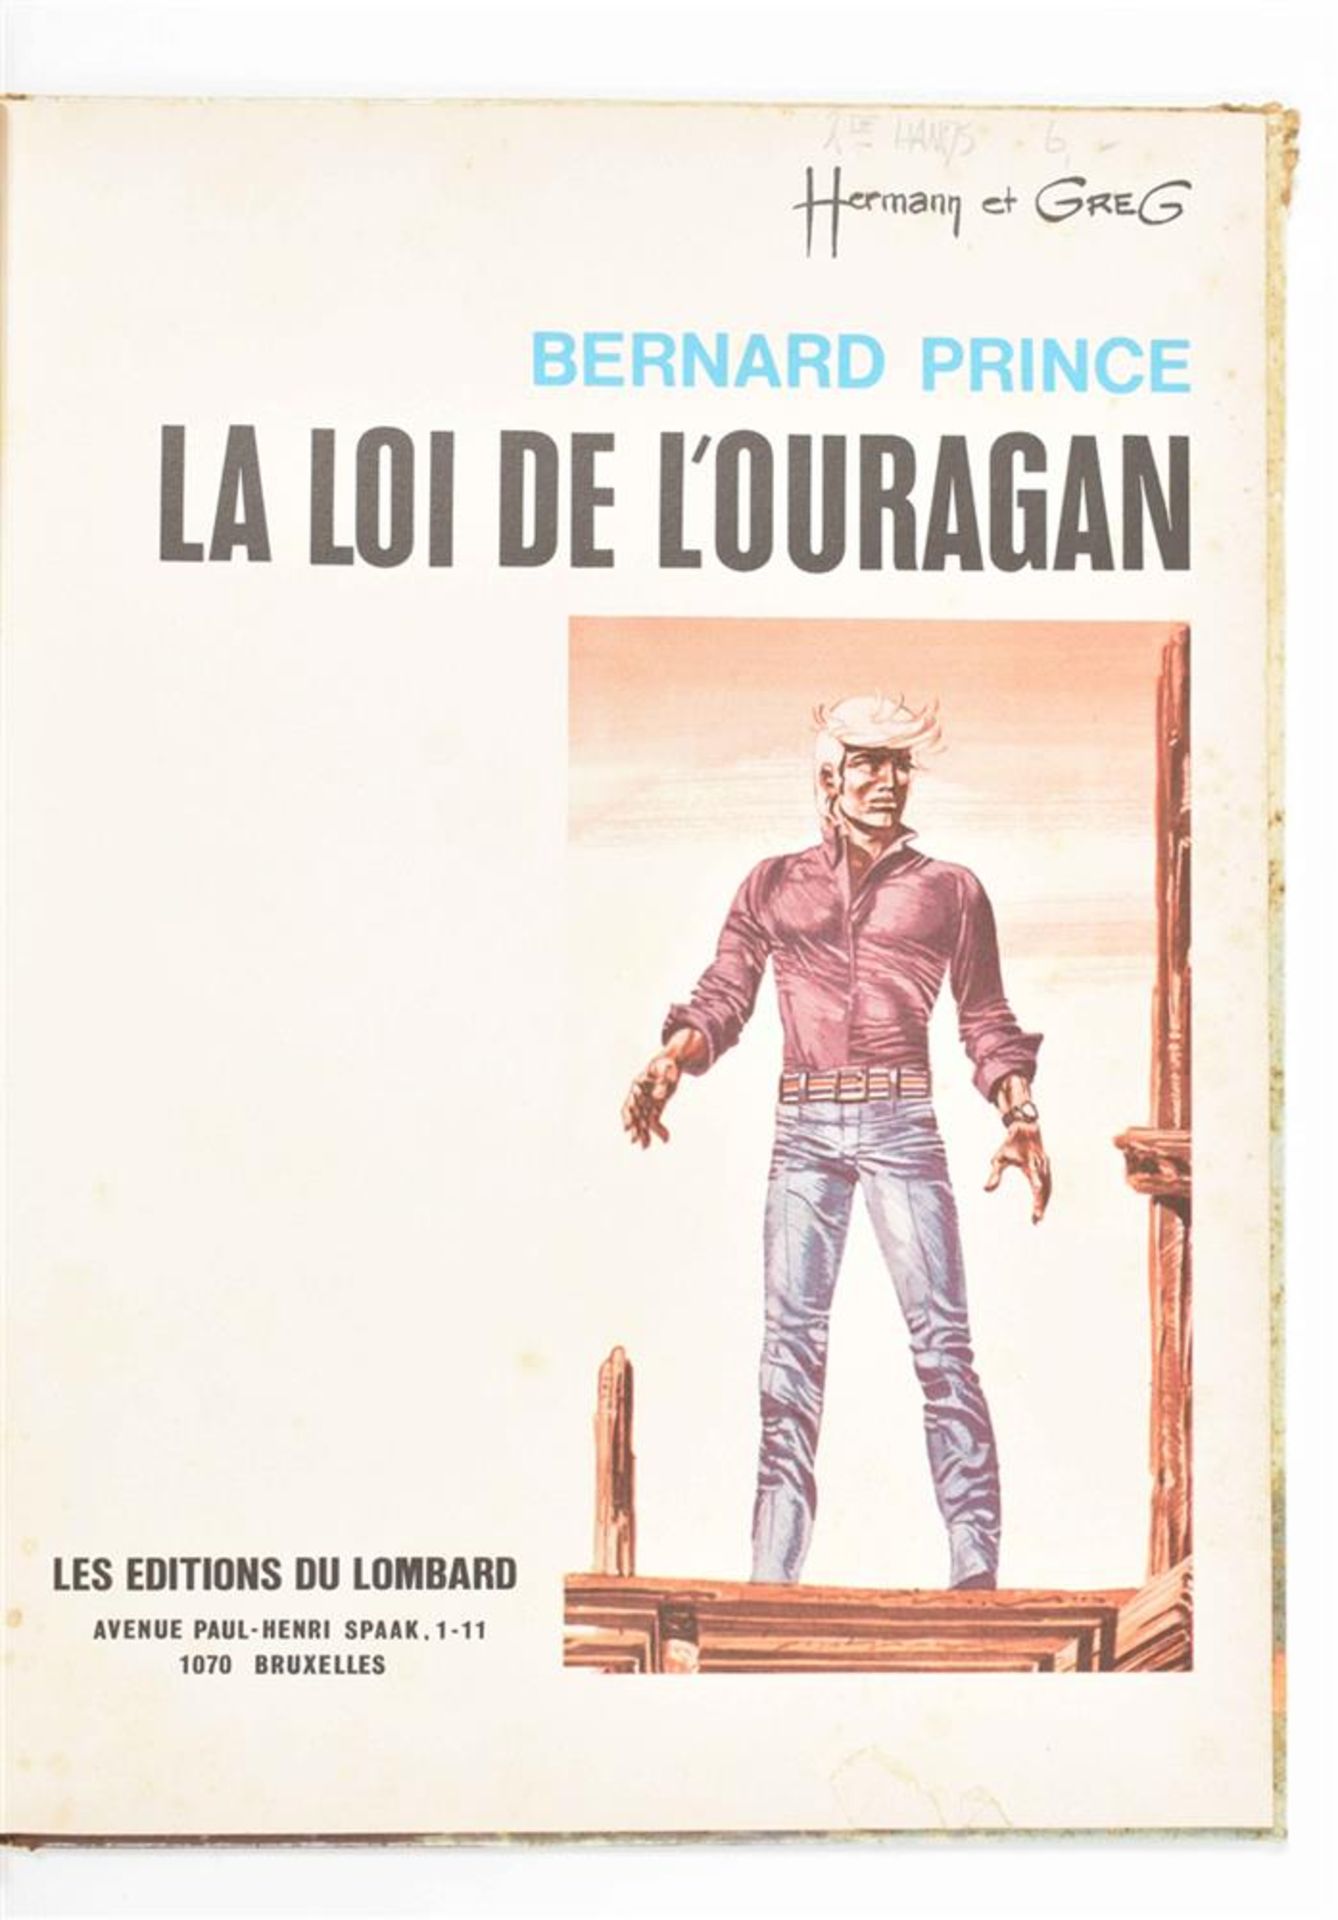 Collection of French comics: Hermann & Greg + Auclair + Jodorowsky & Moebius - Image 6 of 6